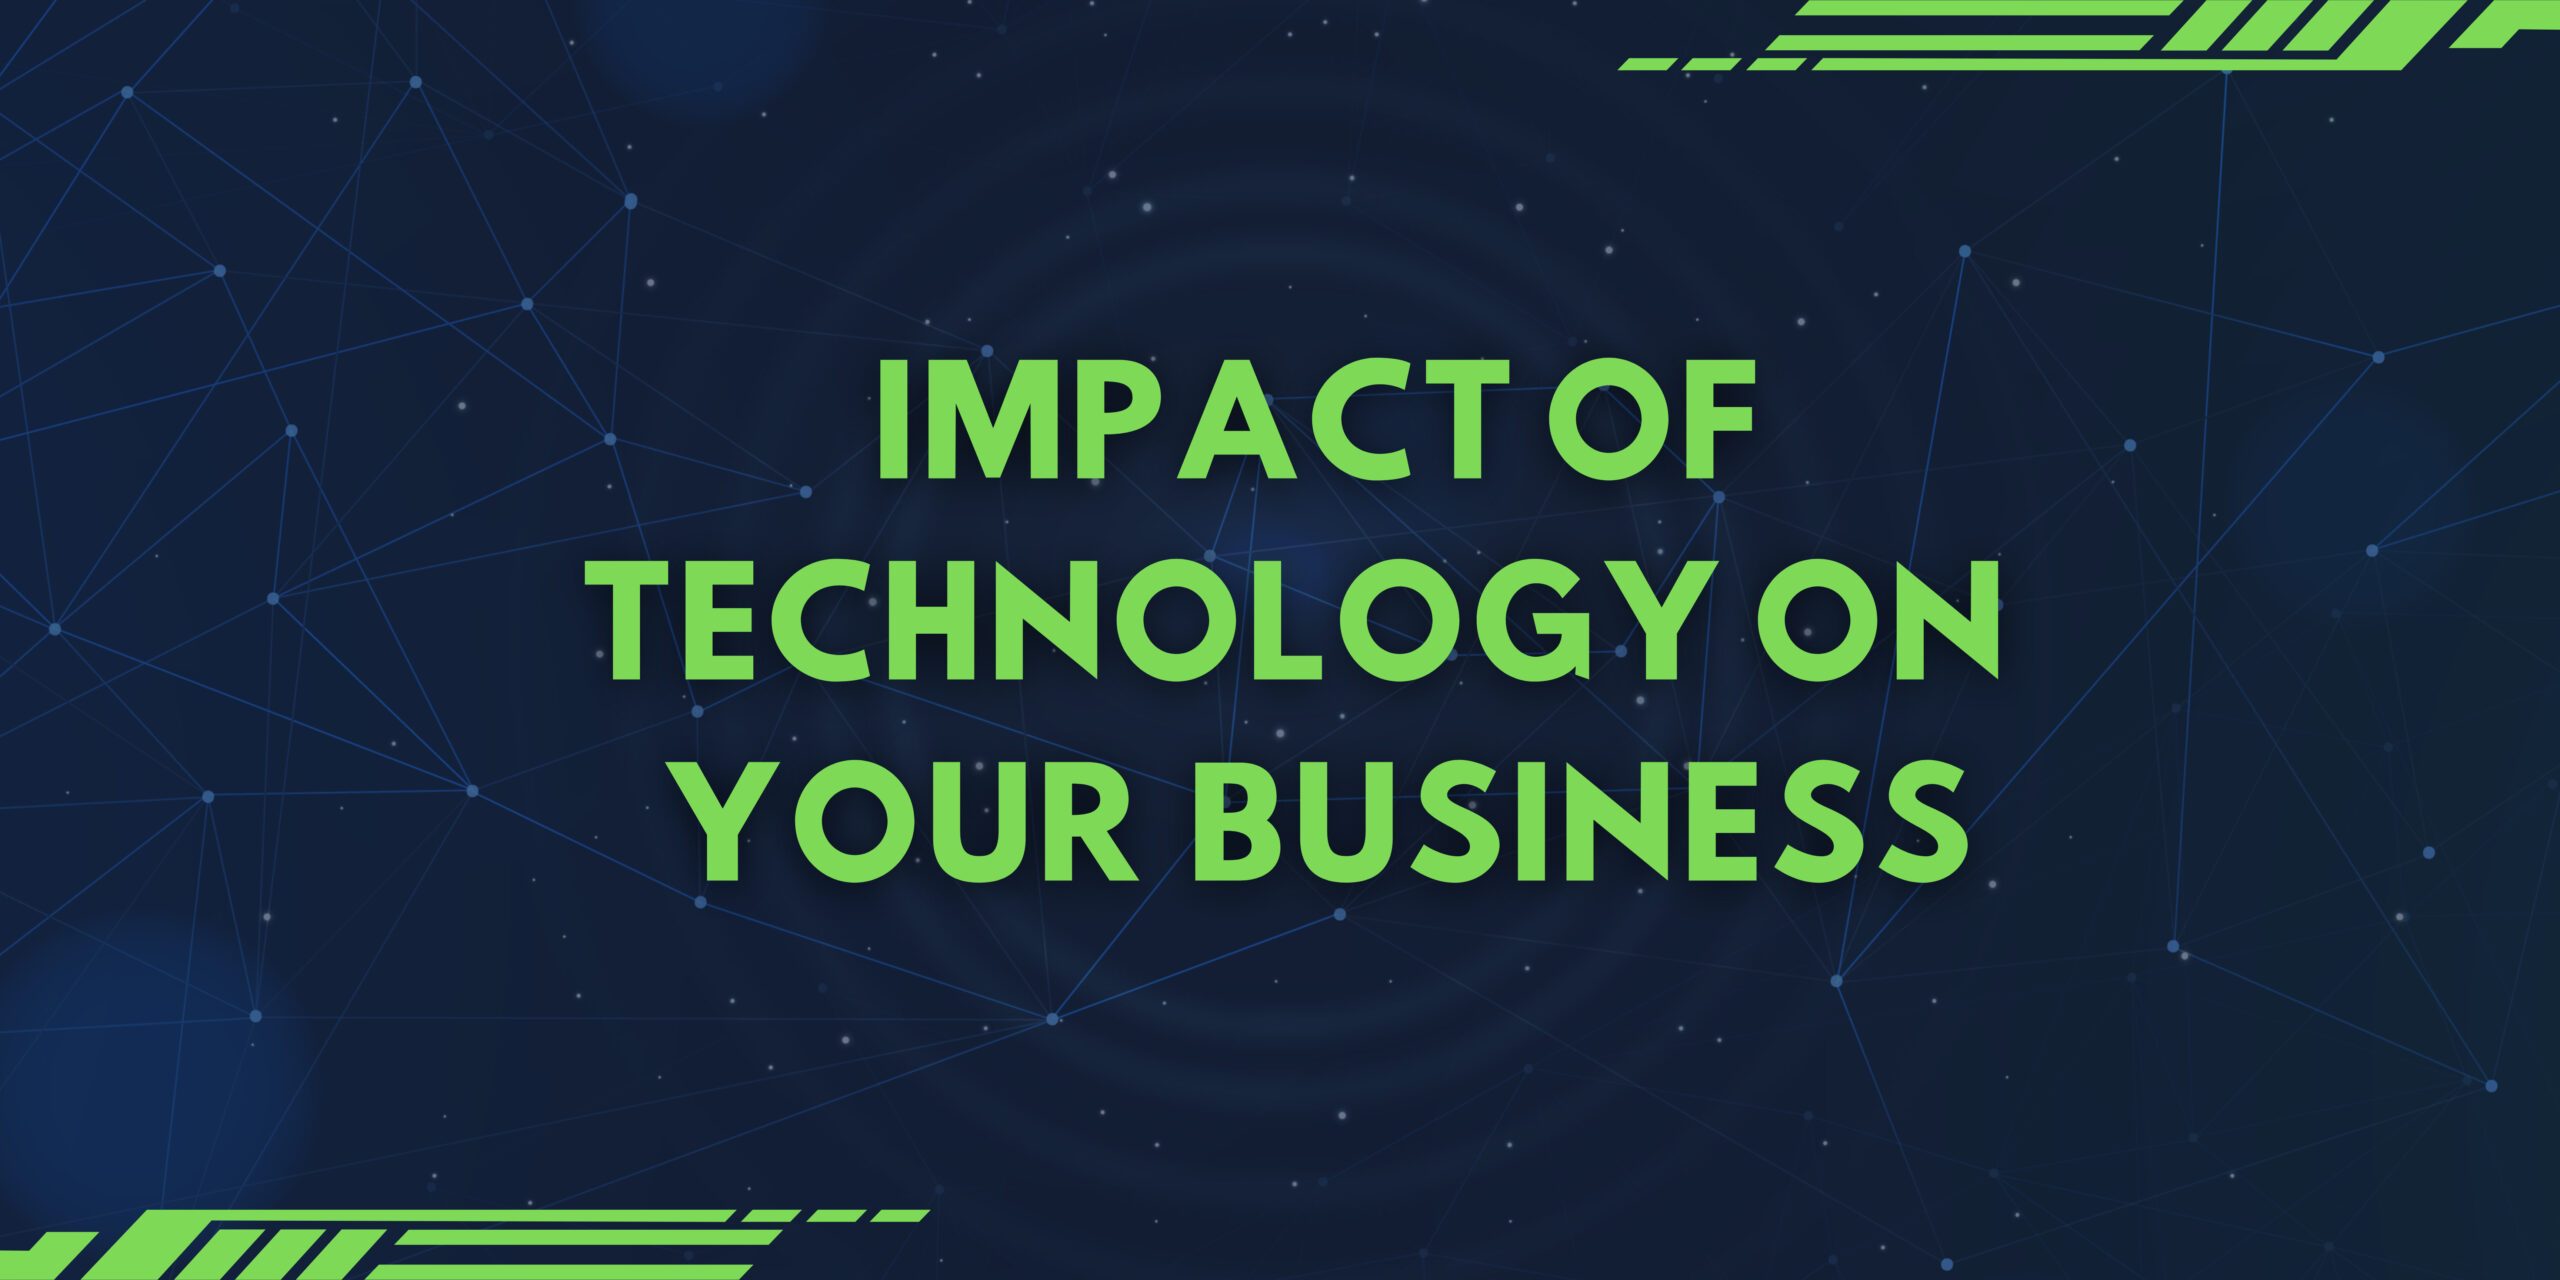 Impact of technology on business